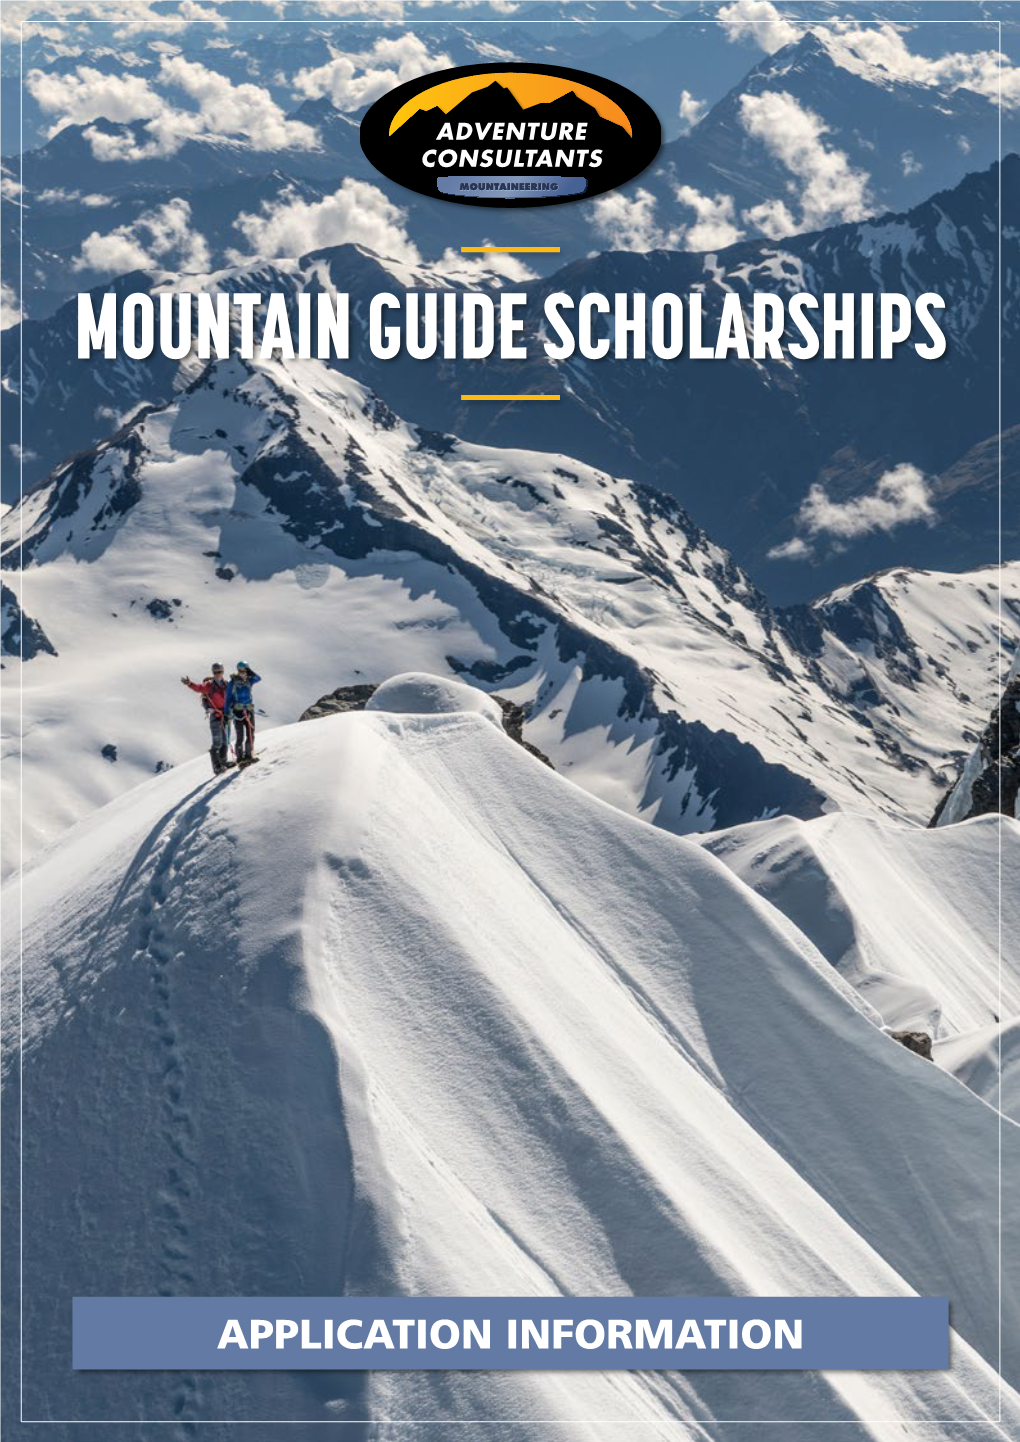 Adventure Consultants Mountain Guide Scholarships